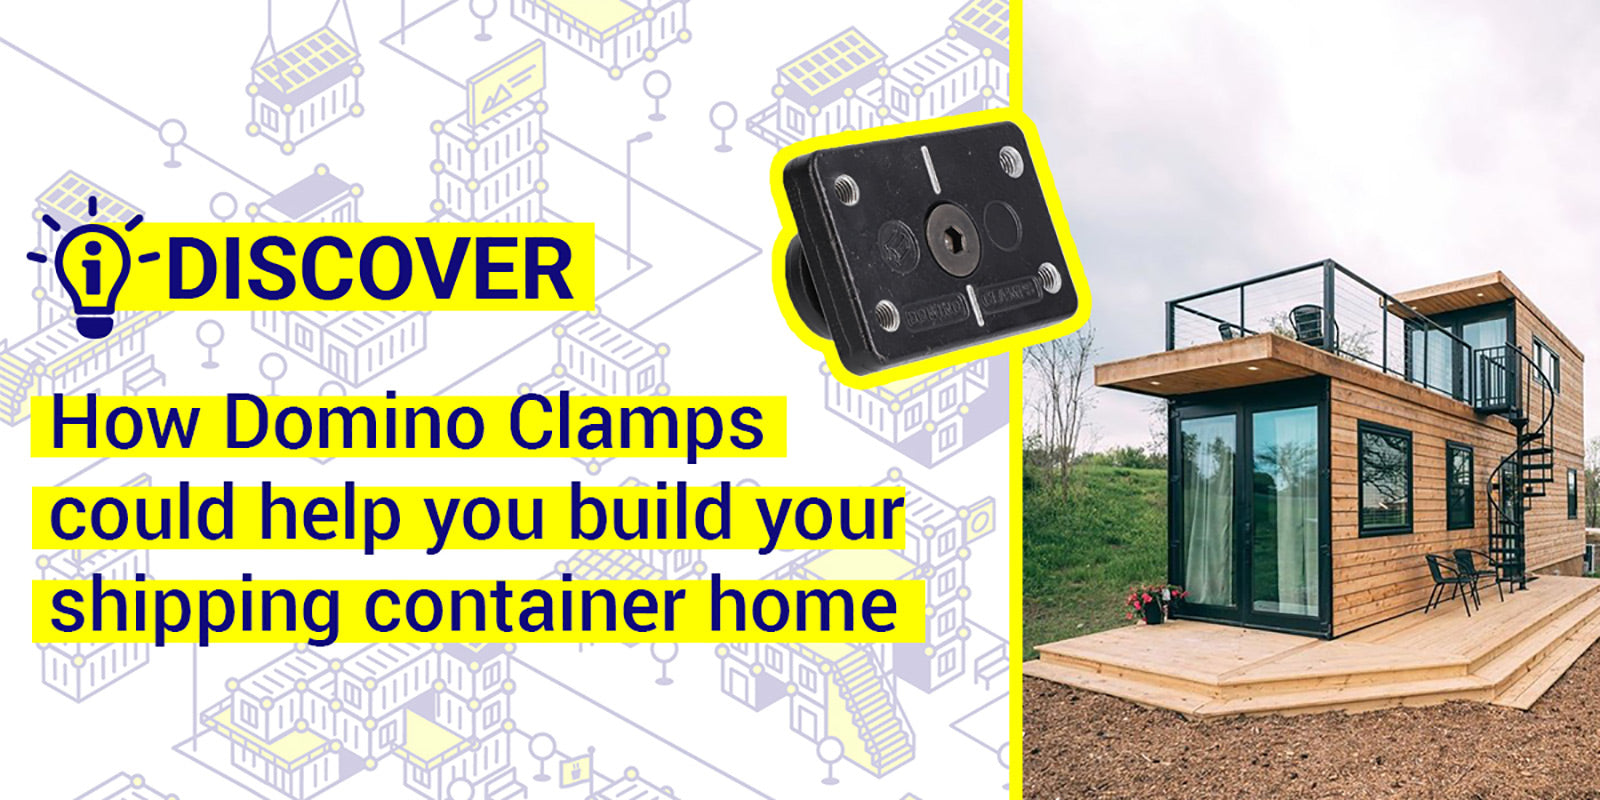 How Domino Clamps could help you build your shipping container home